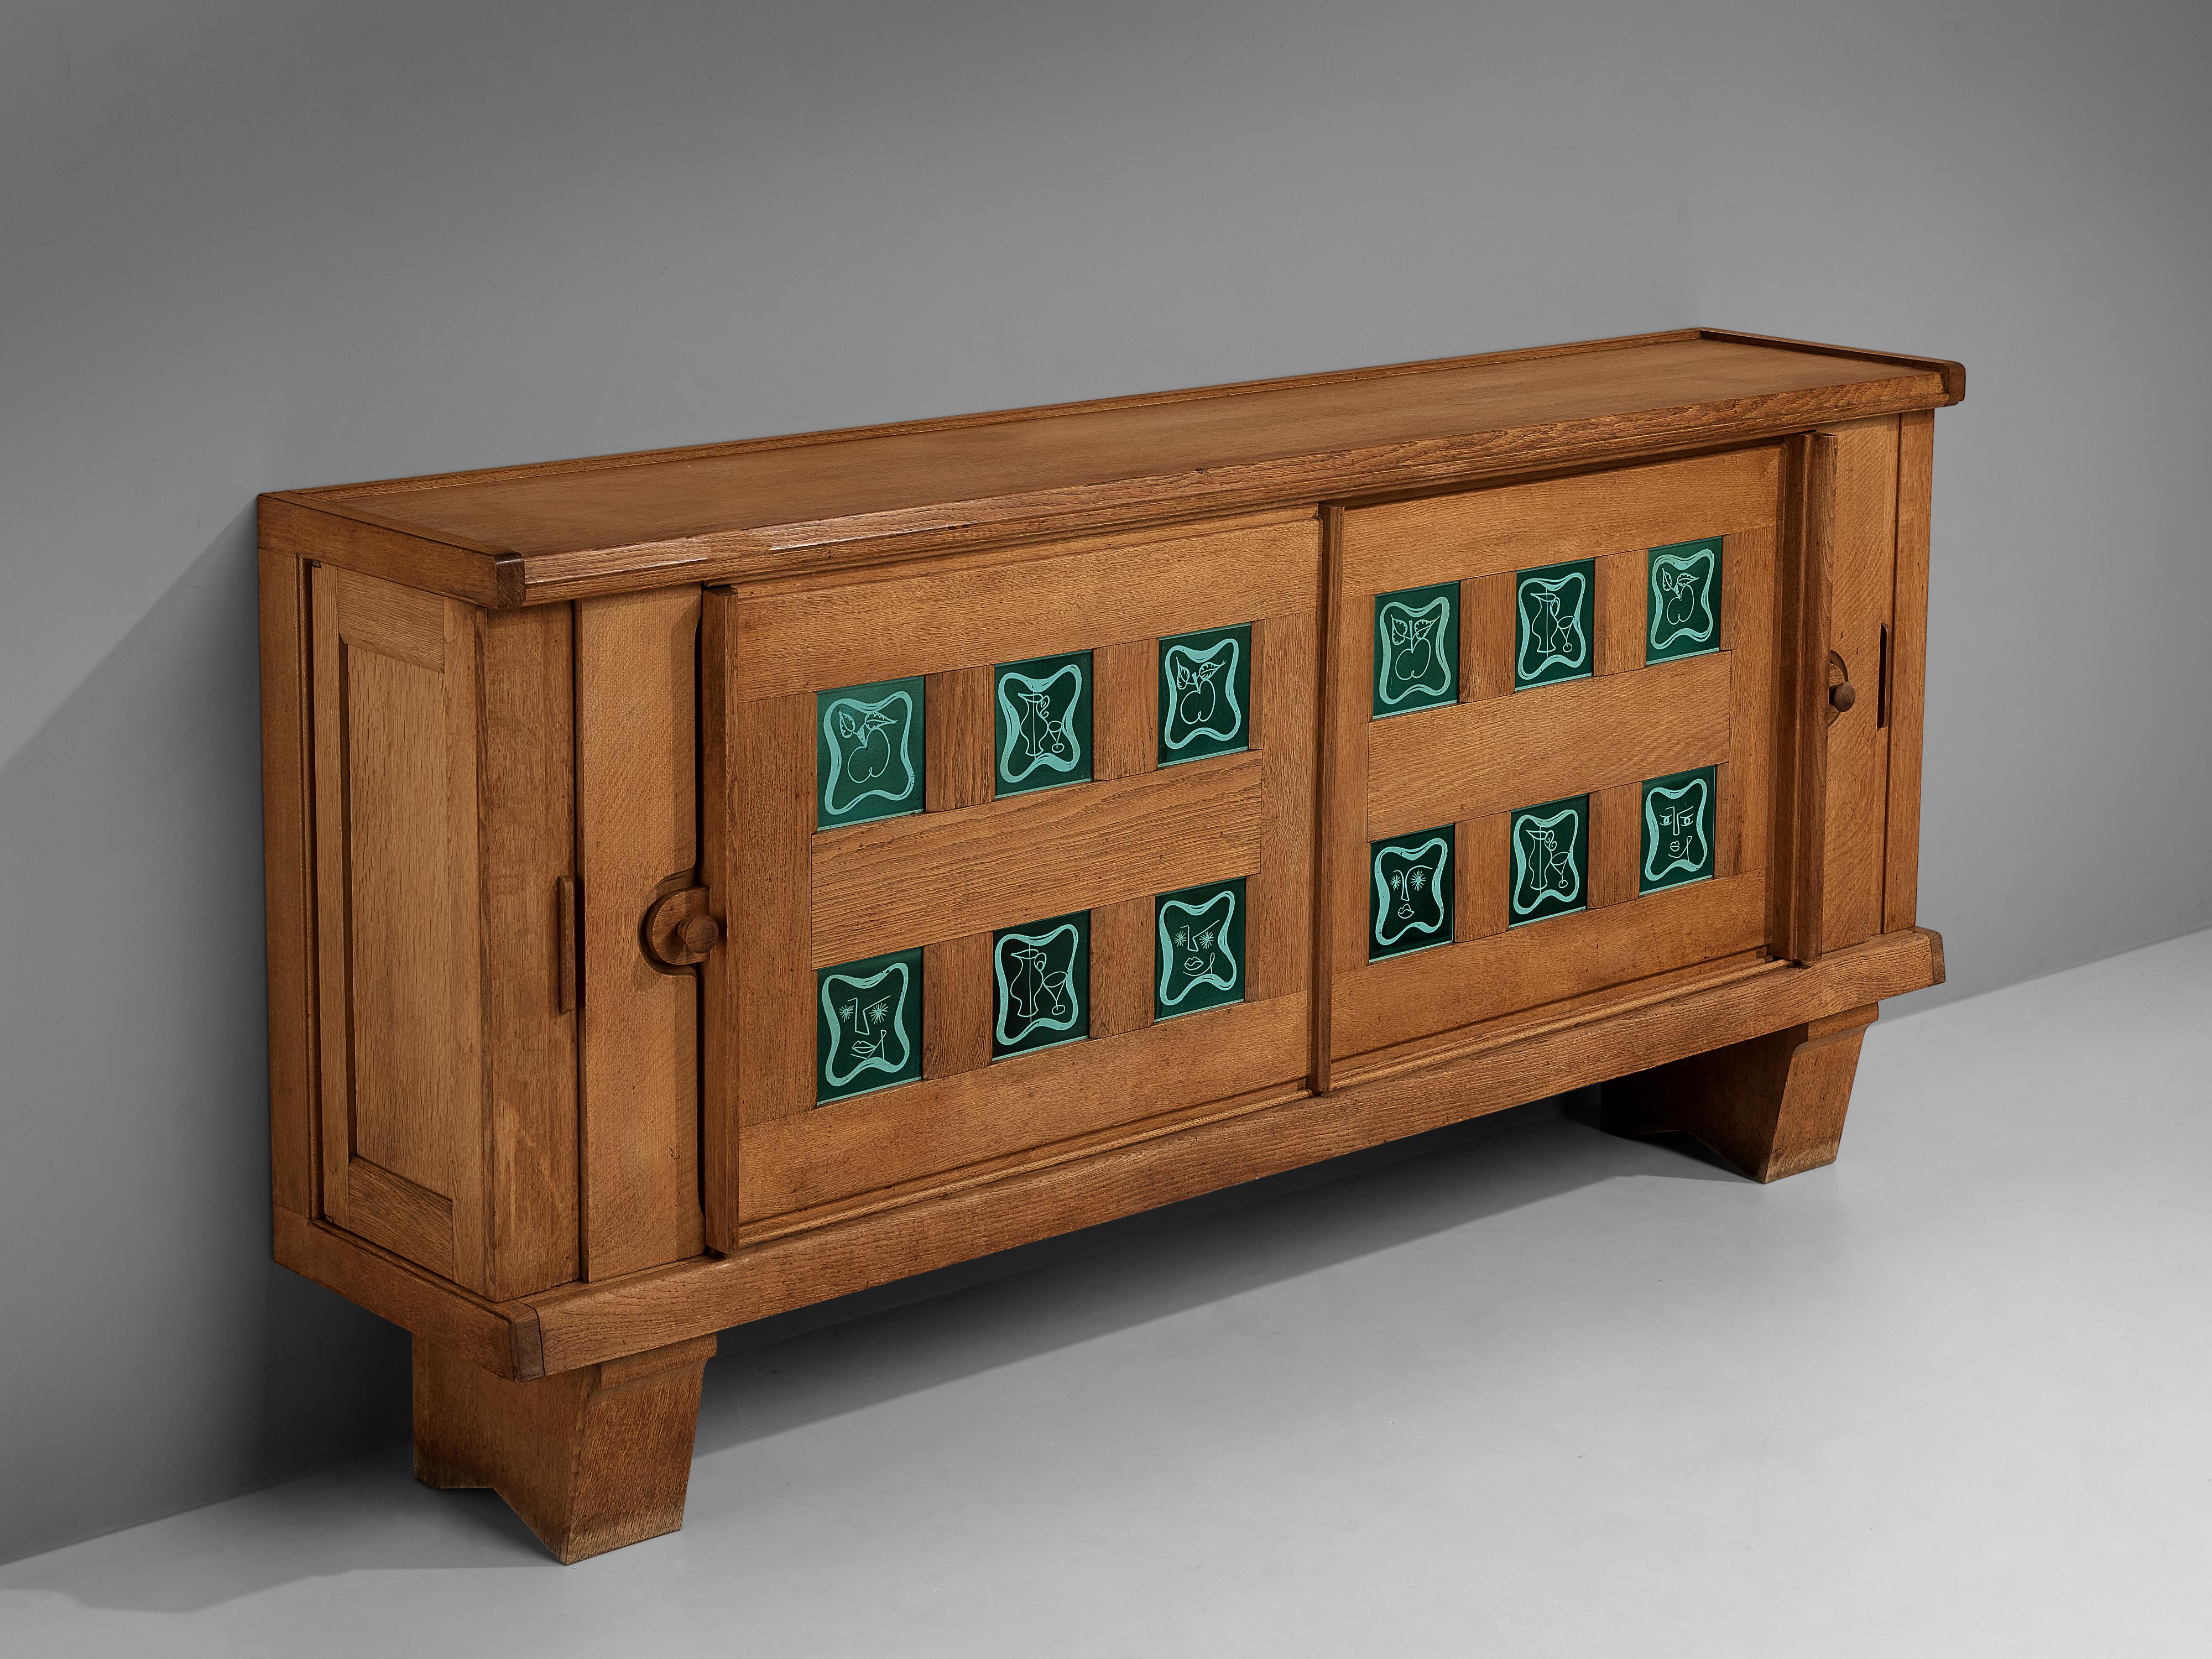 Guillerme & Chambron, sideboard, solid oak, ceramic tiles, France, 1950s

This cabinet holds the characteristics of the French designer duo Guillerme & Chambron. The base has typical legs and provides a floating appearance to the storage part. The